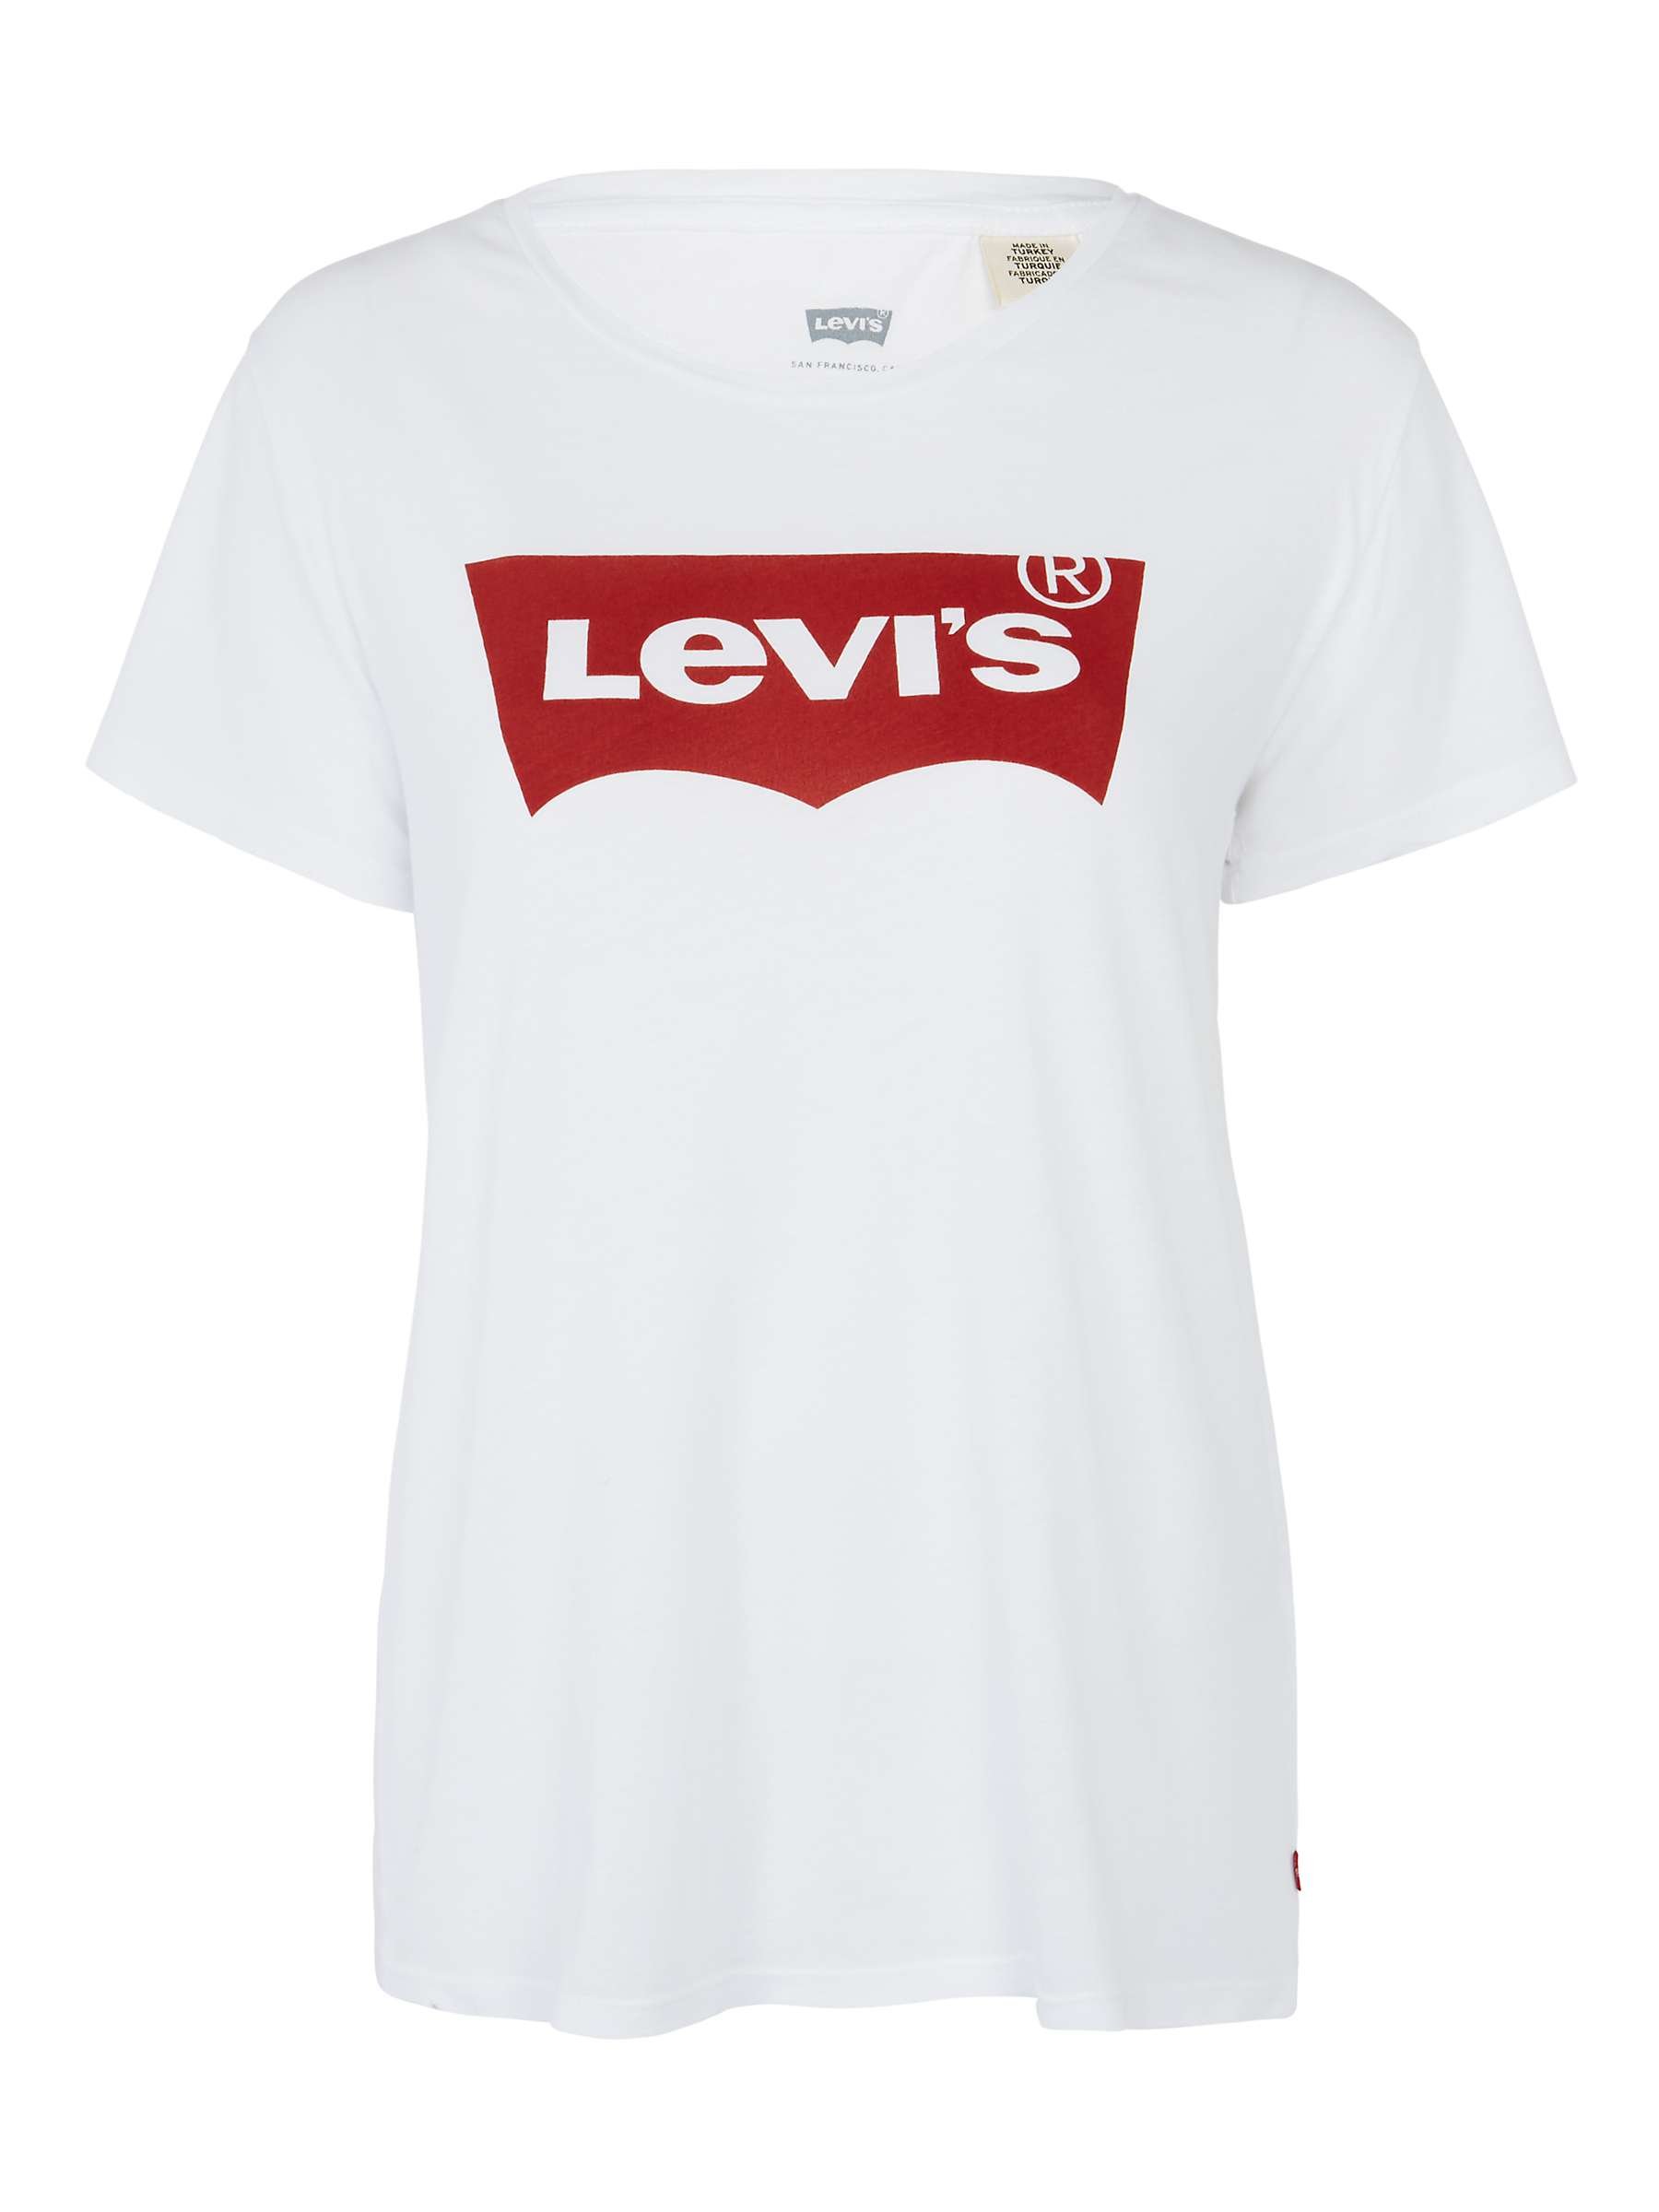 Introducir 64+ imagen levi’s white t shirt with red logo